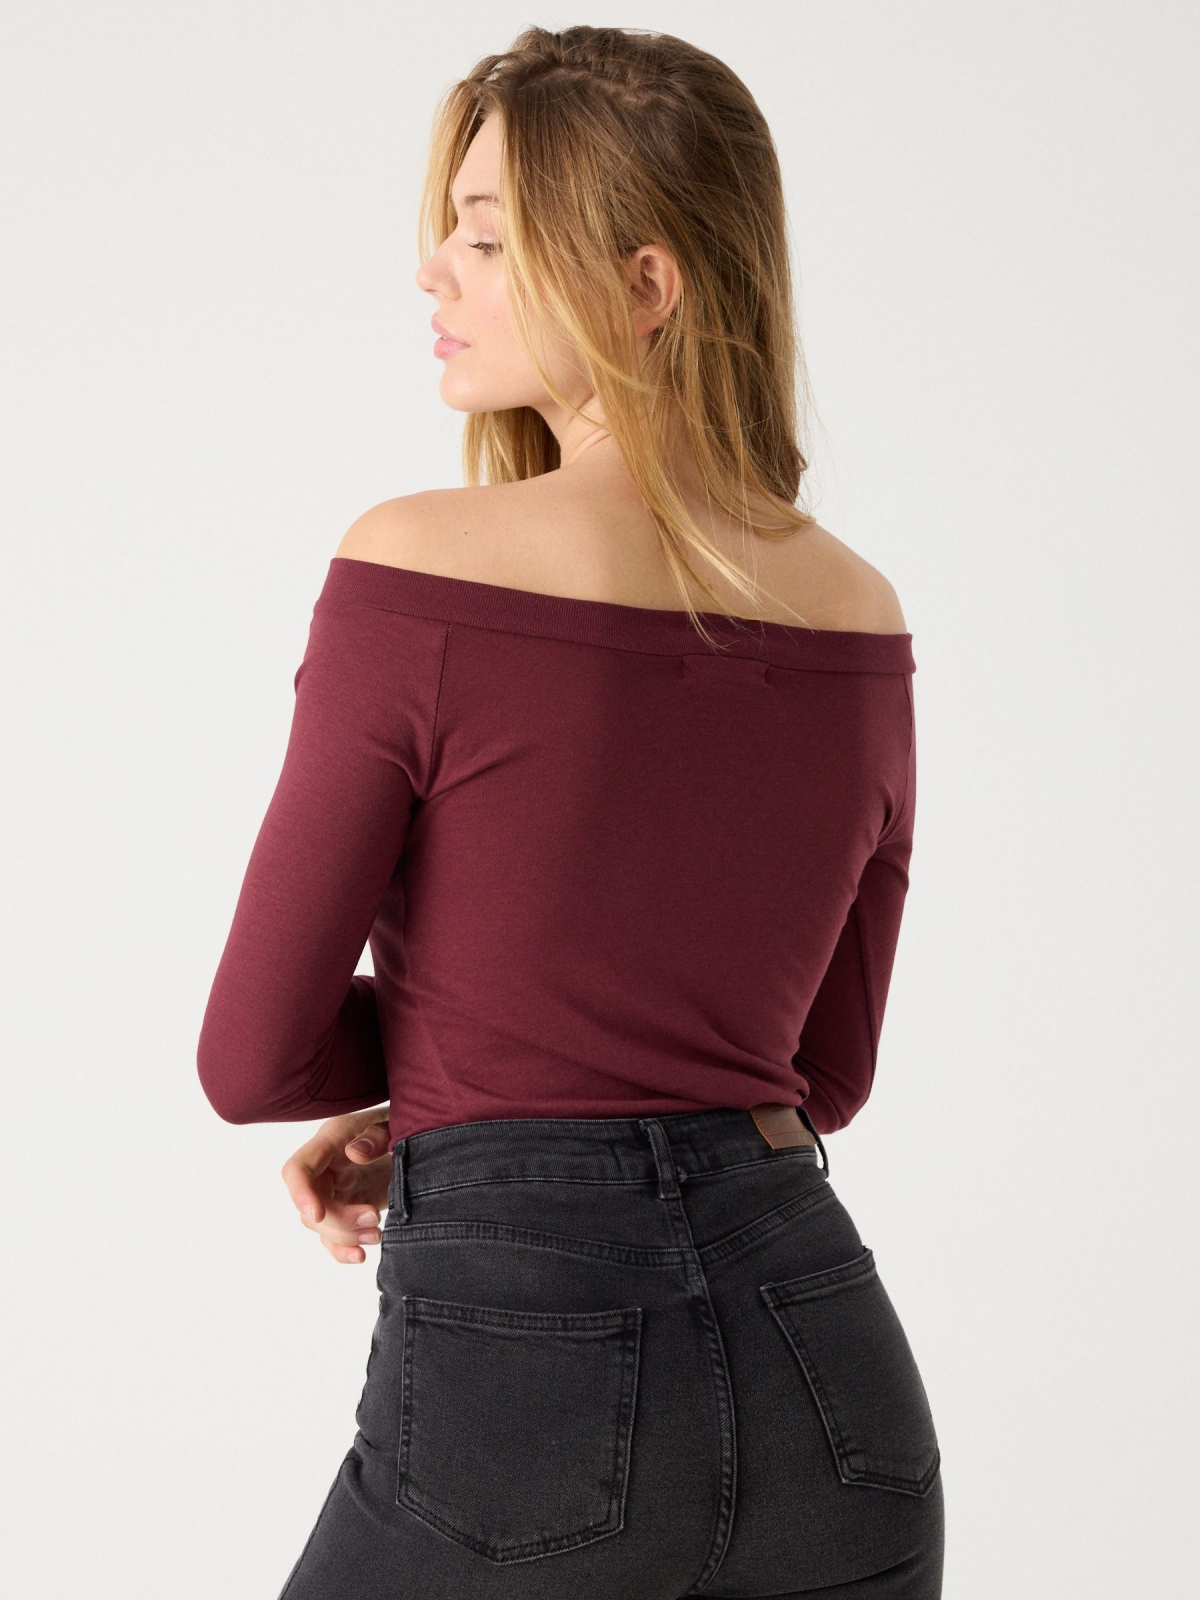 T-shirt with print burgundy middle back view